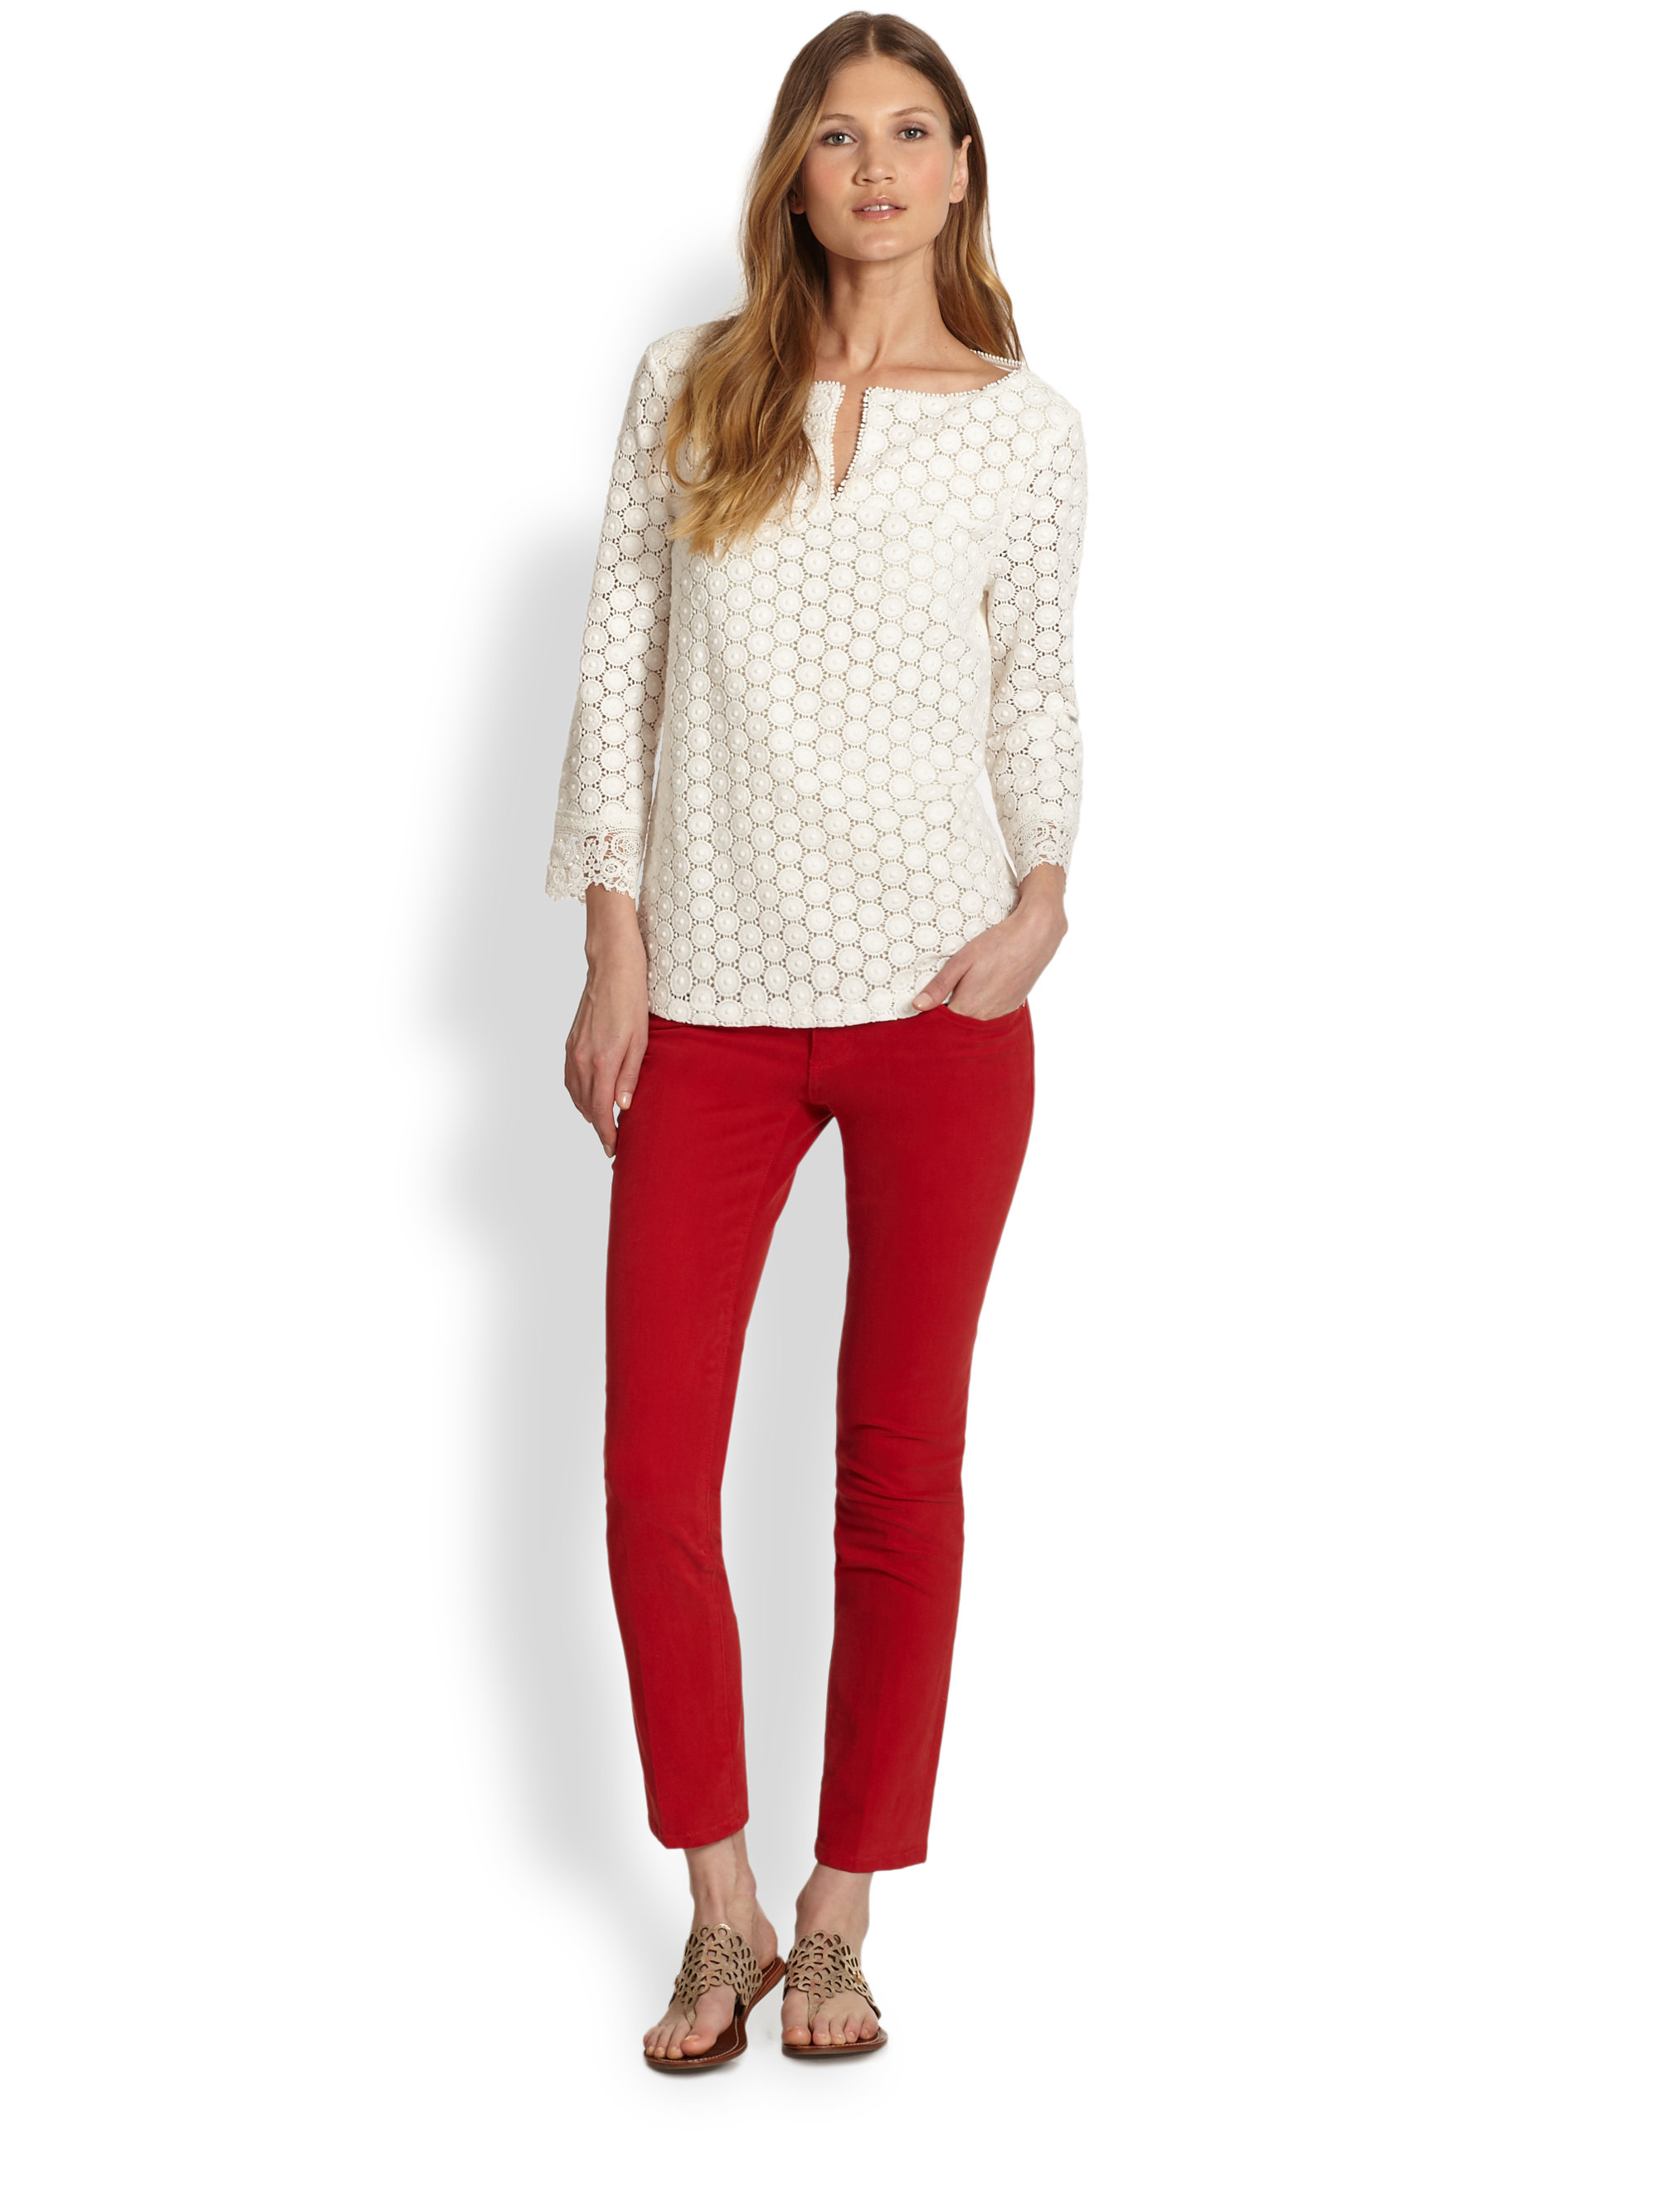 Tory Burch Alexa Cropped Skinny Jeans in Red | Lyst